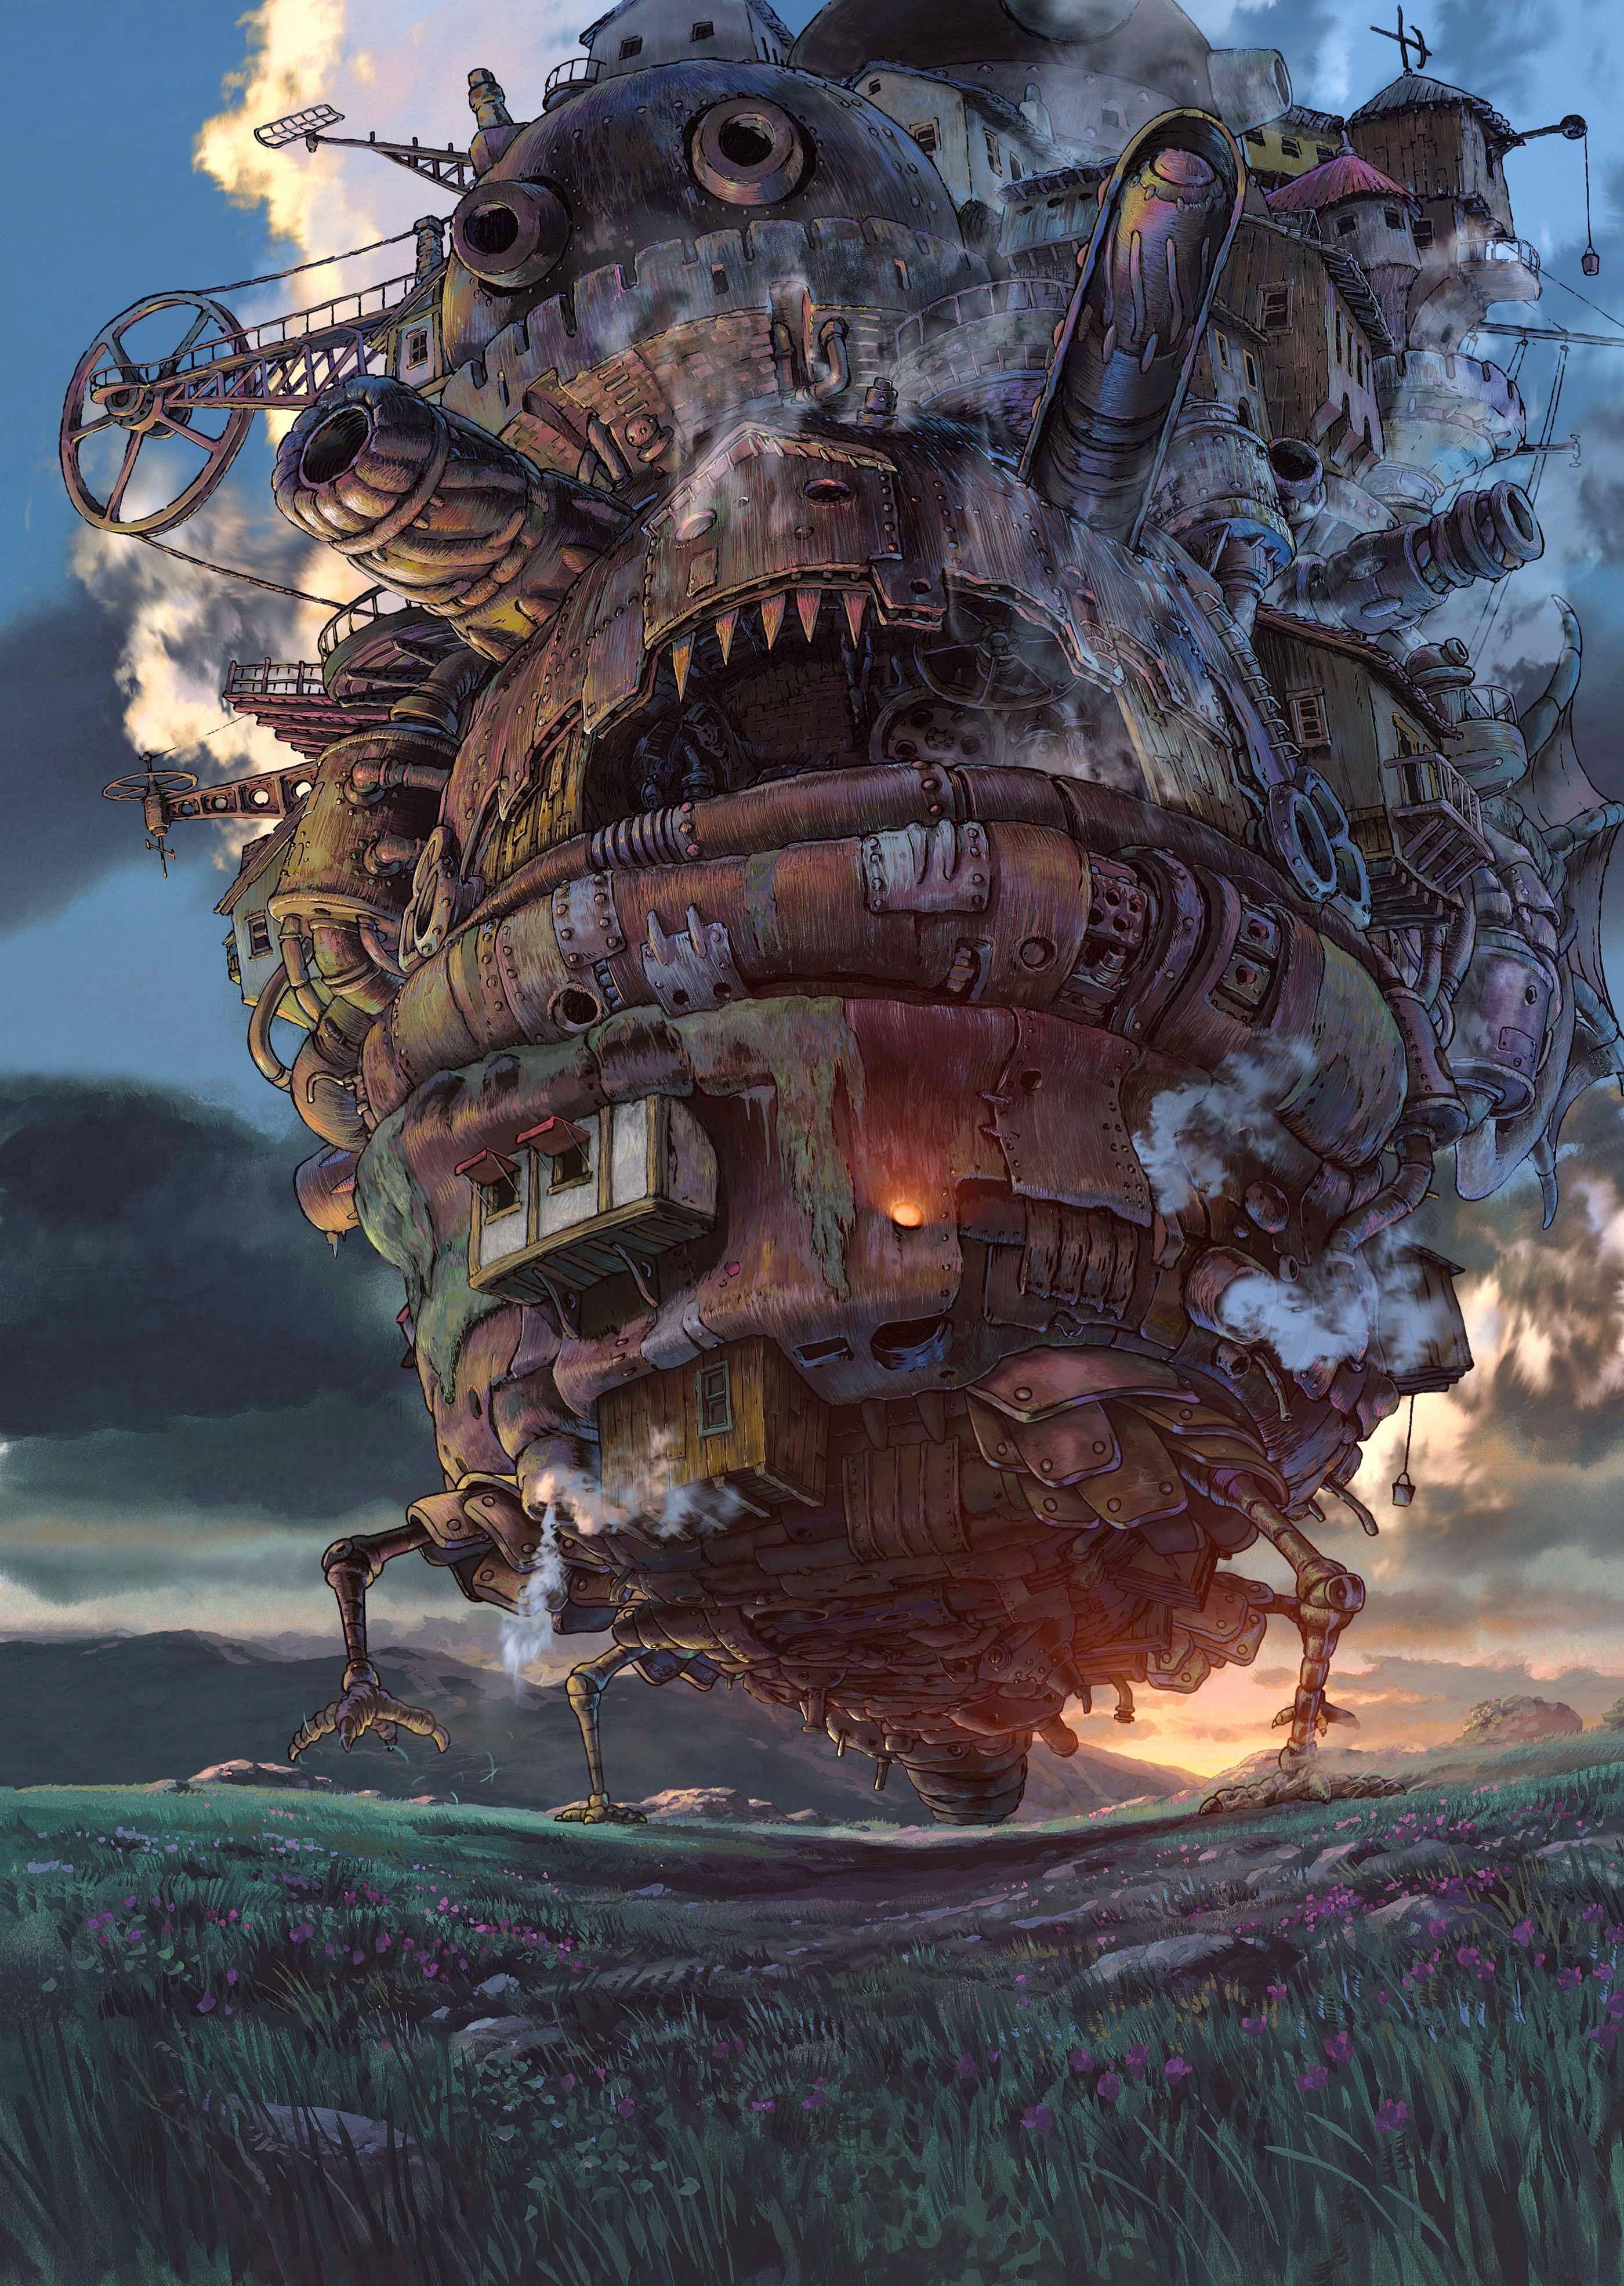 Super HD Howl's Moving Castle Wallpapers: ghibli